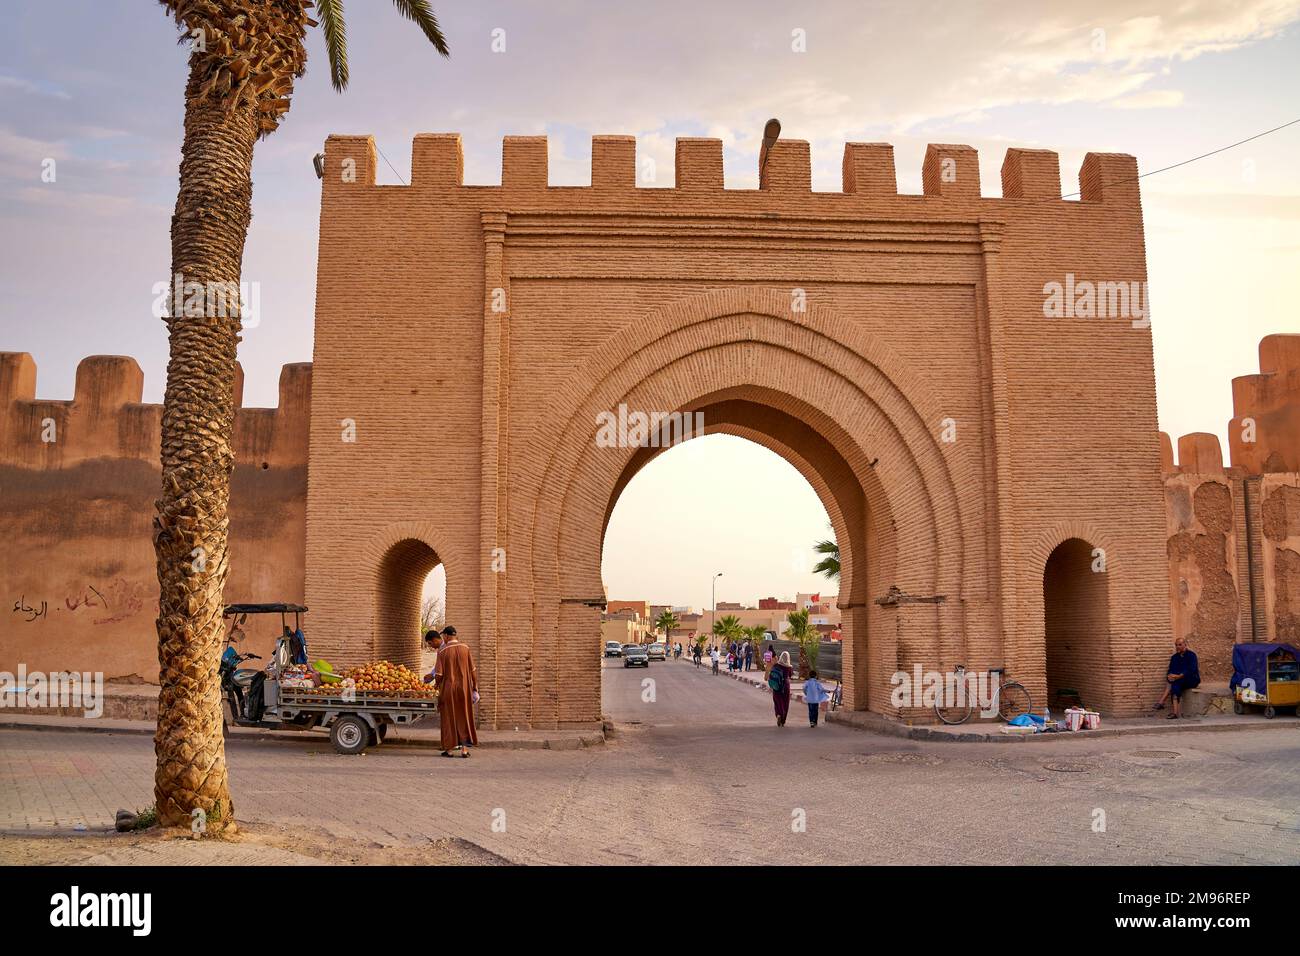 Gate to the city, Taroudant, Morocco, Africa Stock Photo